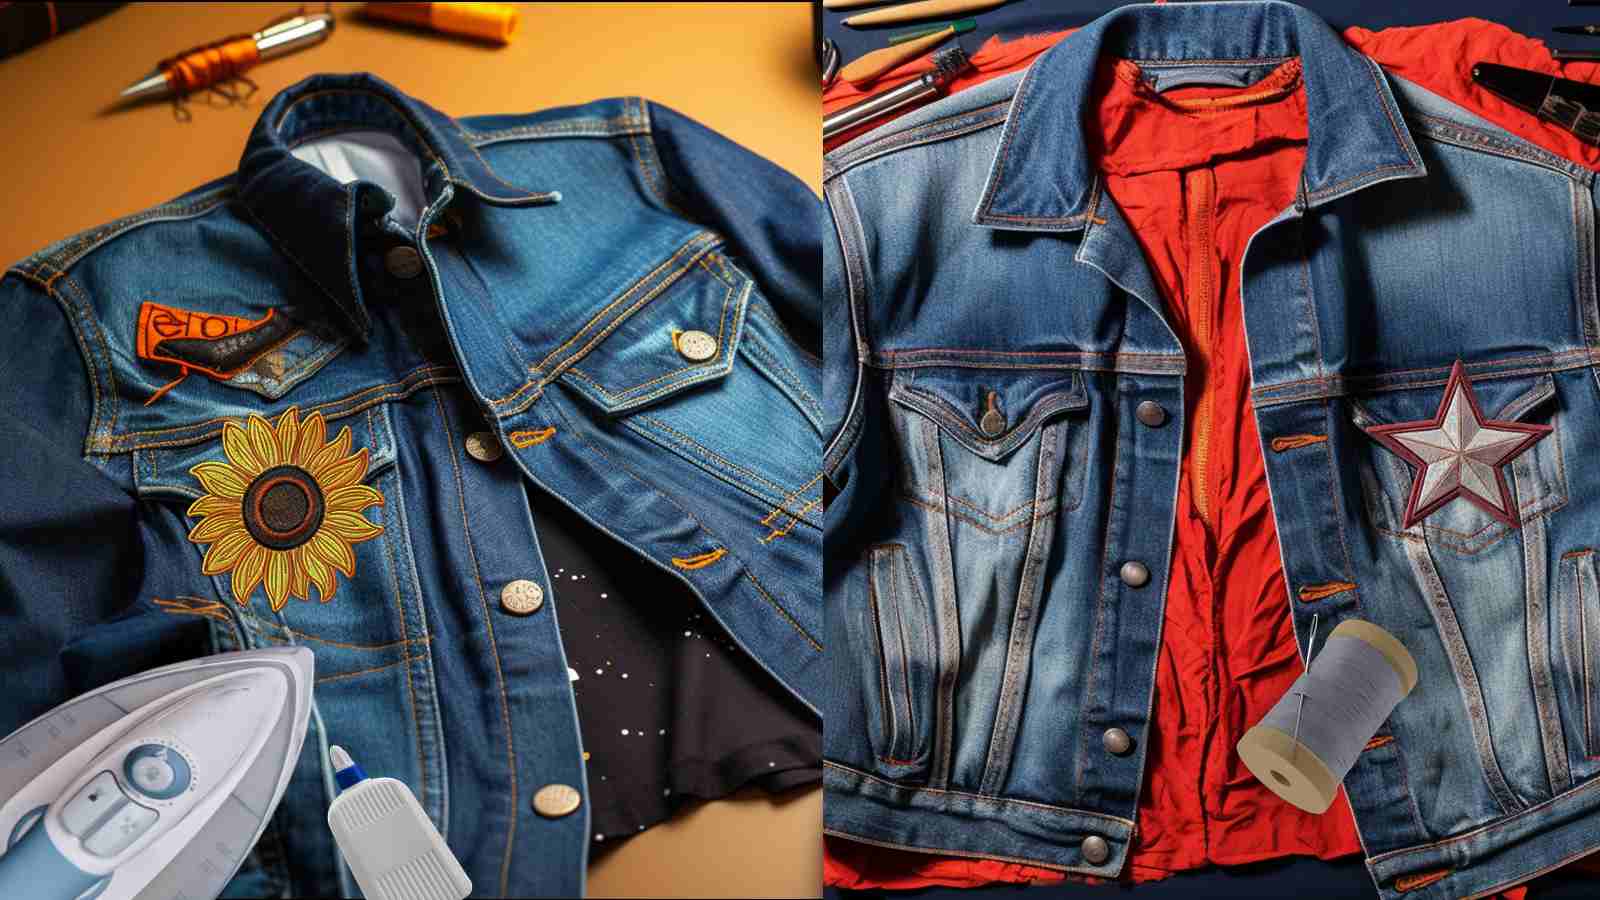 Two pictures of a denim jacket with a star on it.